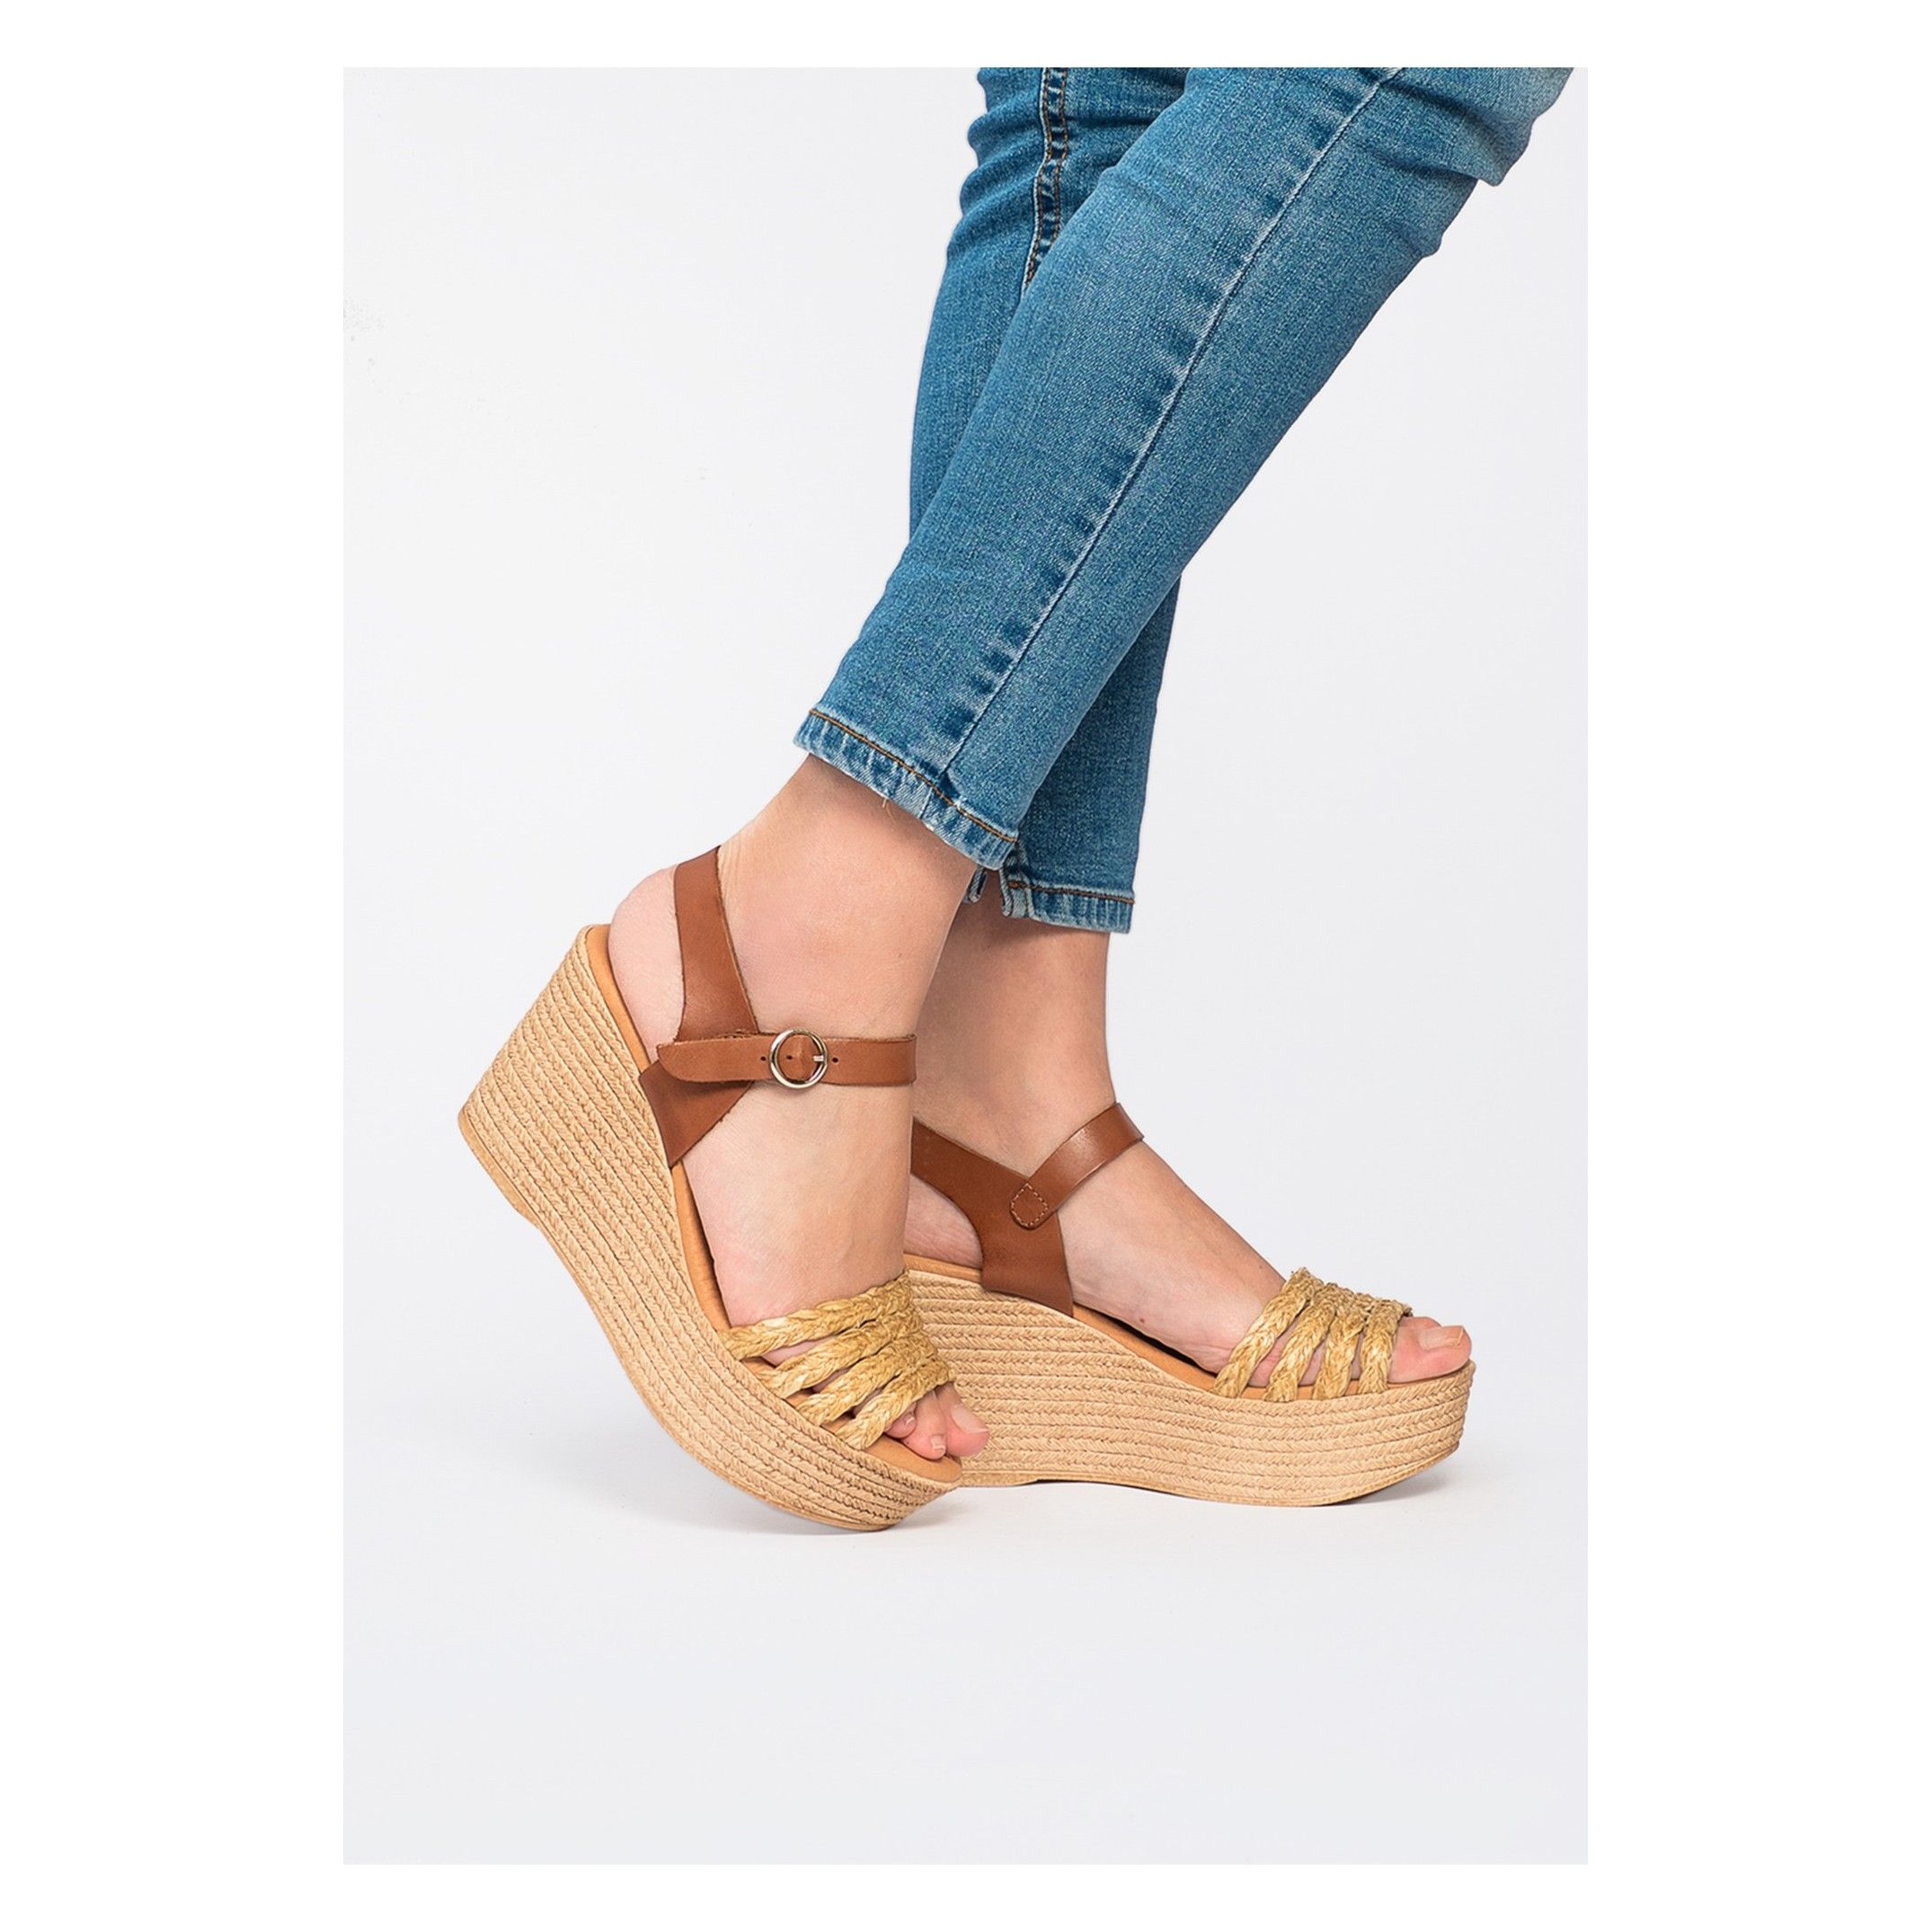 High Wedge sandals, by María Barceló Shoes. Upper: cowhide leather and textile. Closure: Metal buckle. Inner lining and insole: pig lining. Padded sole: 0,5 cm. Sole material: 100%, lightweight and non-slip. Heel height: 8'5 cm. Platform 3 cm. Designed and manufactured in Spain.